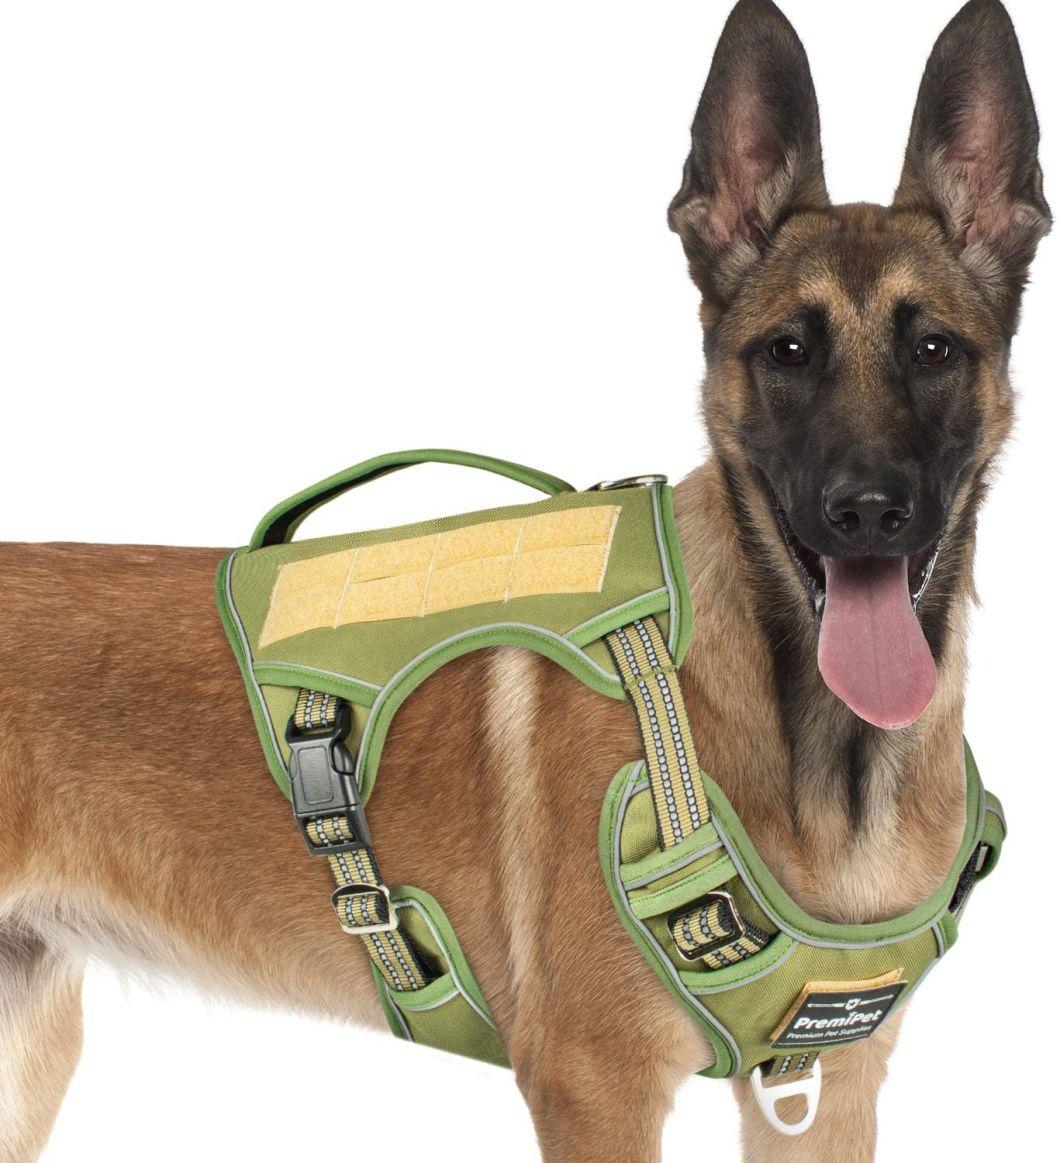 Tactical Dog Harness for Working Service Dog Training, Reflective Molle Military Vest with Vertical Handle for Medium Large Breeds